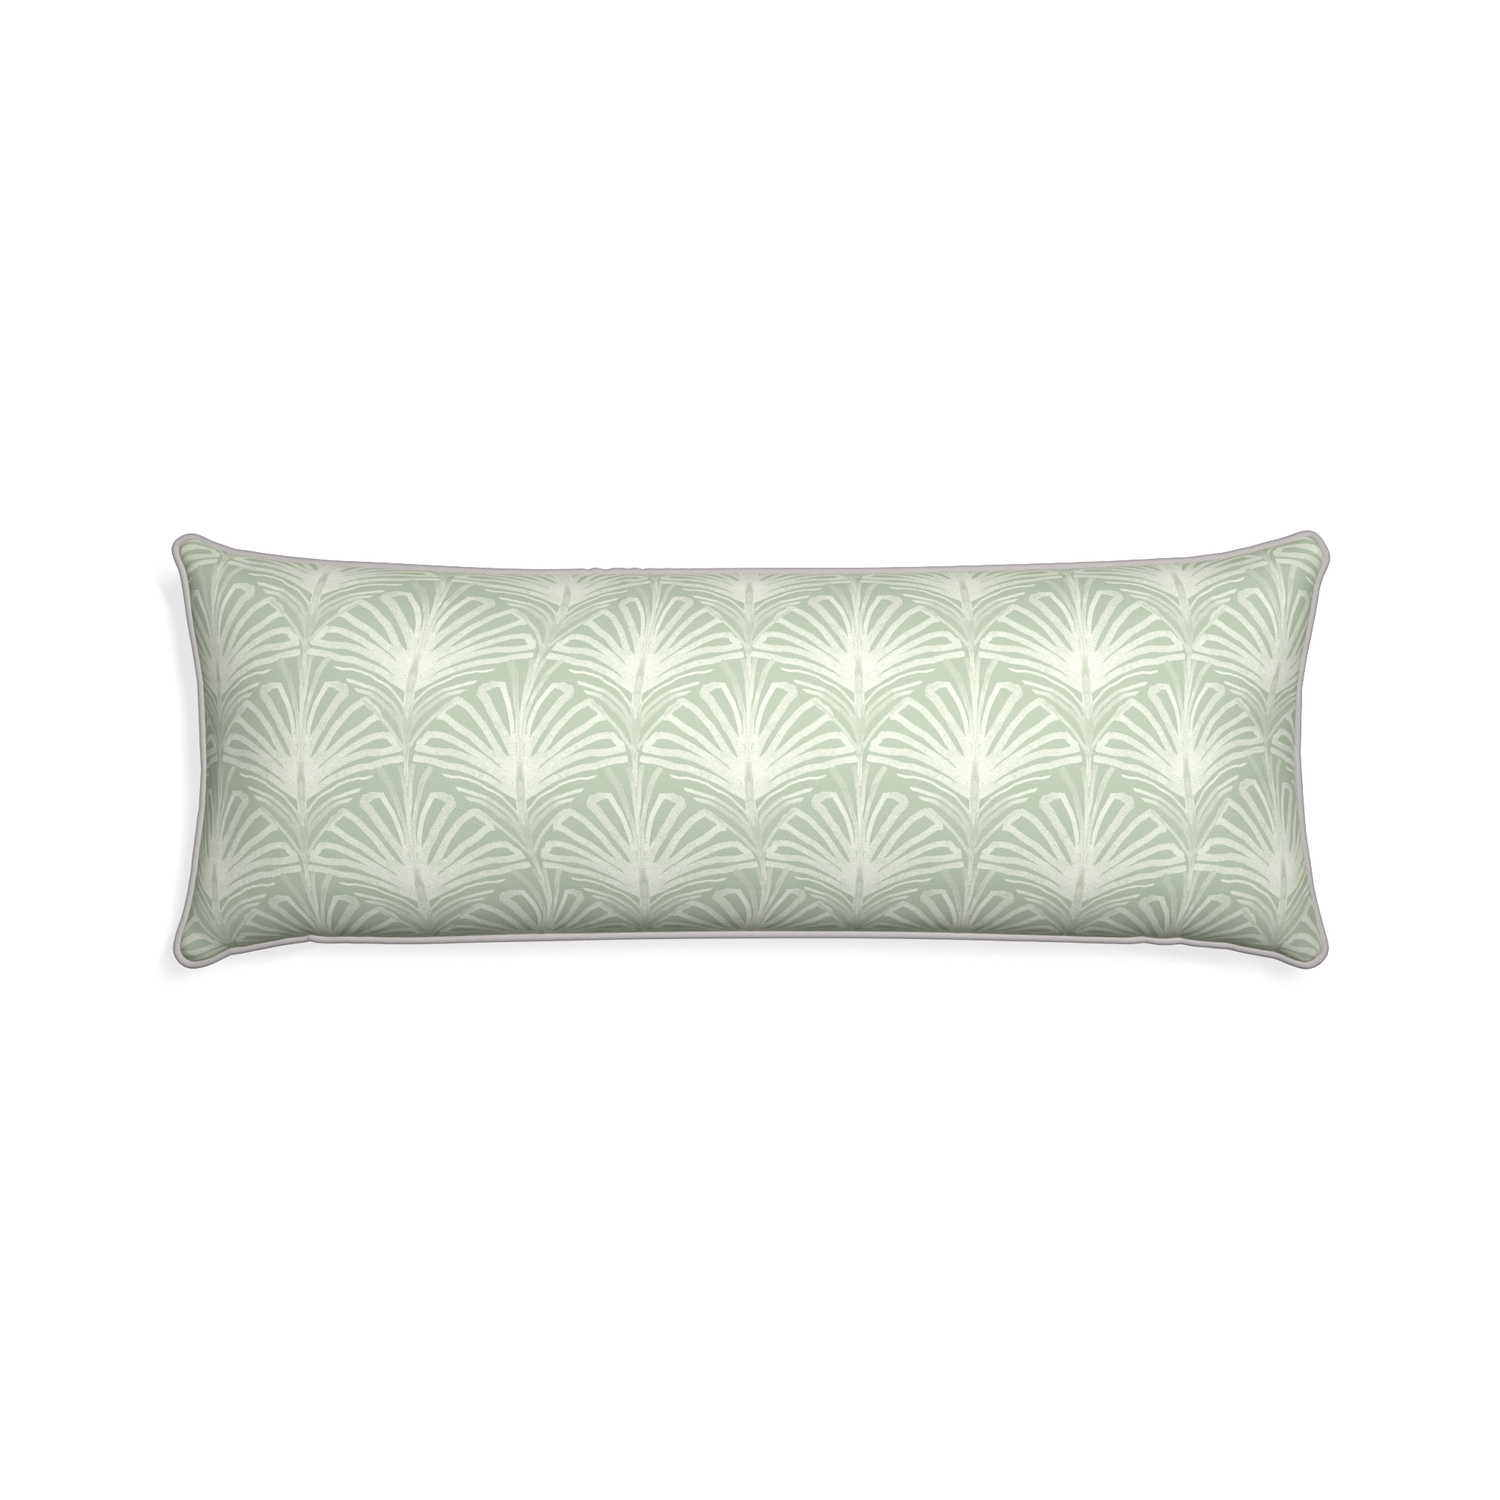 Xl-lumbar suzy sage custom pillow with pebble piping on white background